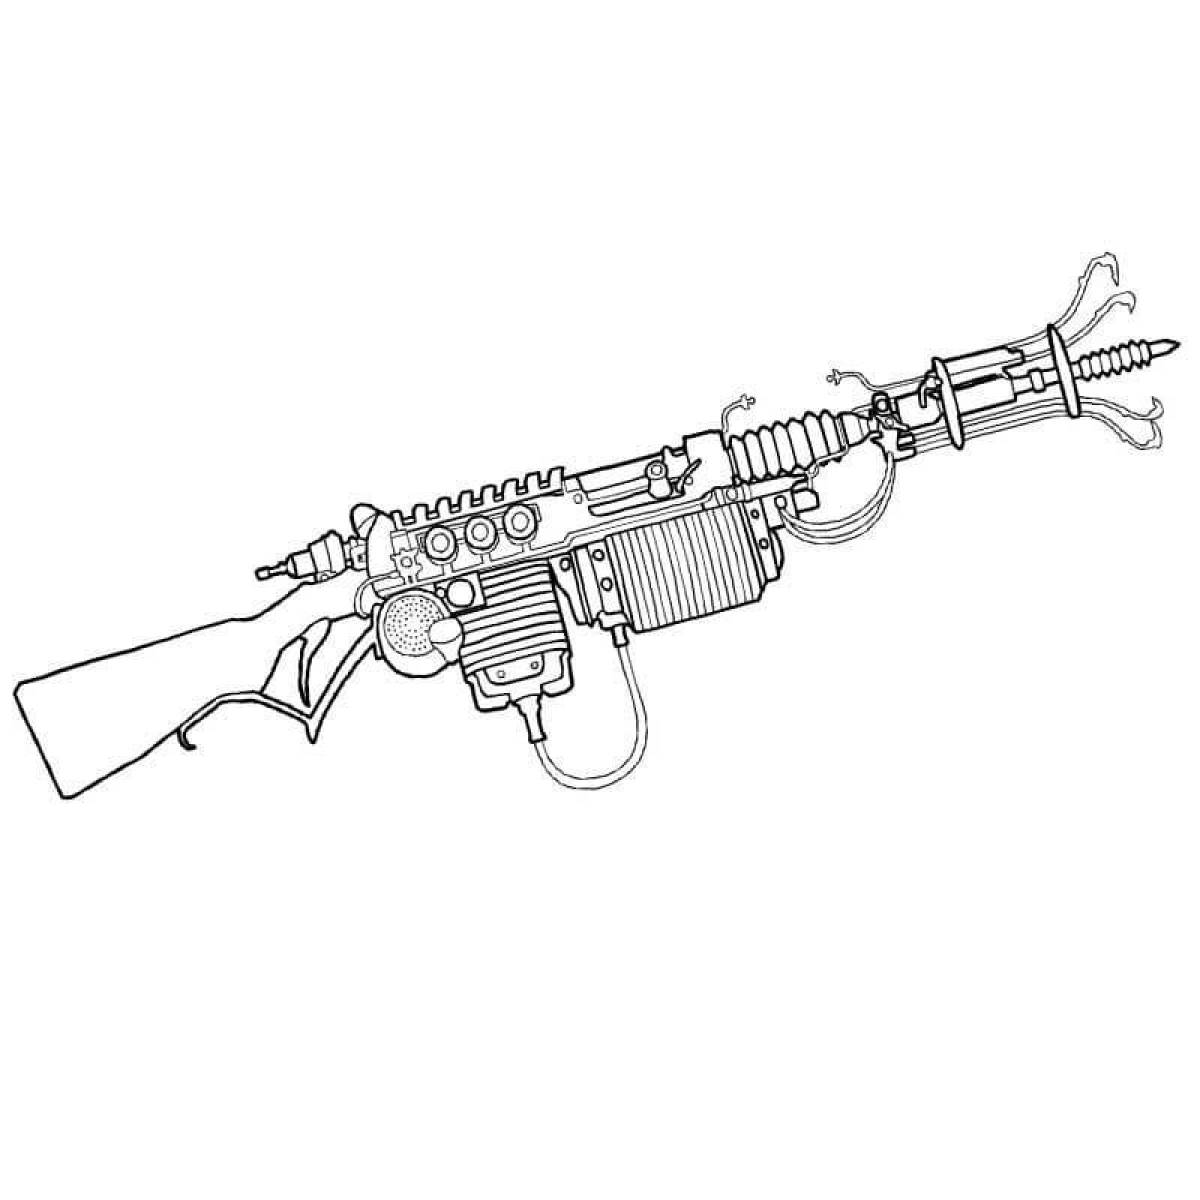 Standoff 2 Weapon Coloring Page